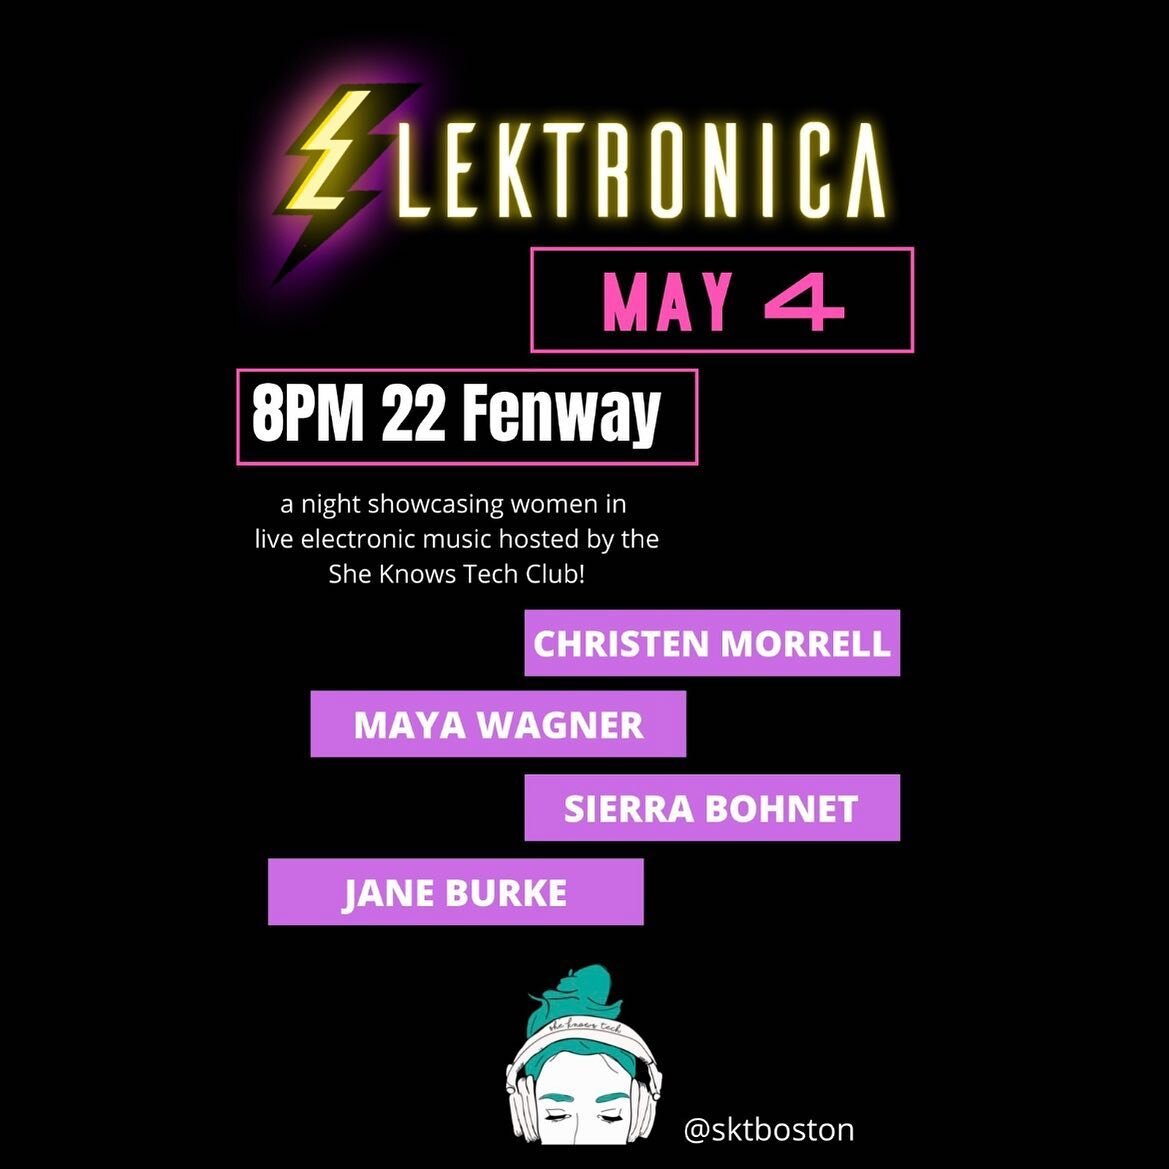 💜Helloo!!! Exciting news!💜
May 4th we&rsquo;re having our SKT Elektronica concert featuring 4 amazing female artists!
Come through to 22 Fenway at 8pm for some awesome live electronic music!!!
&bull;
#sheknowstech #livemusic #electronicmusic #femal